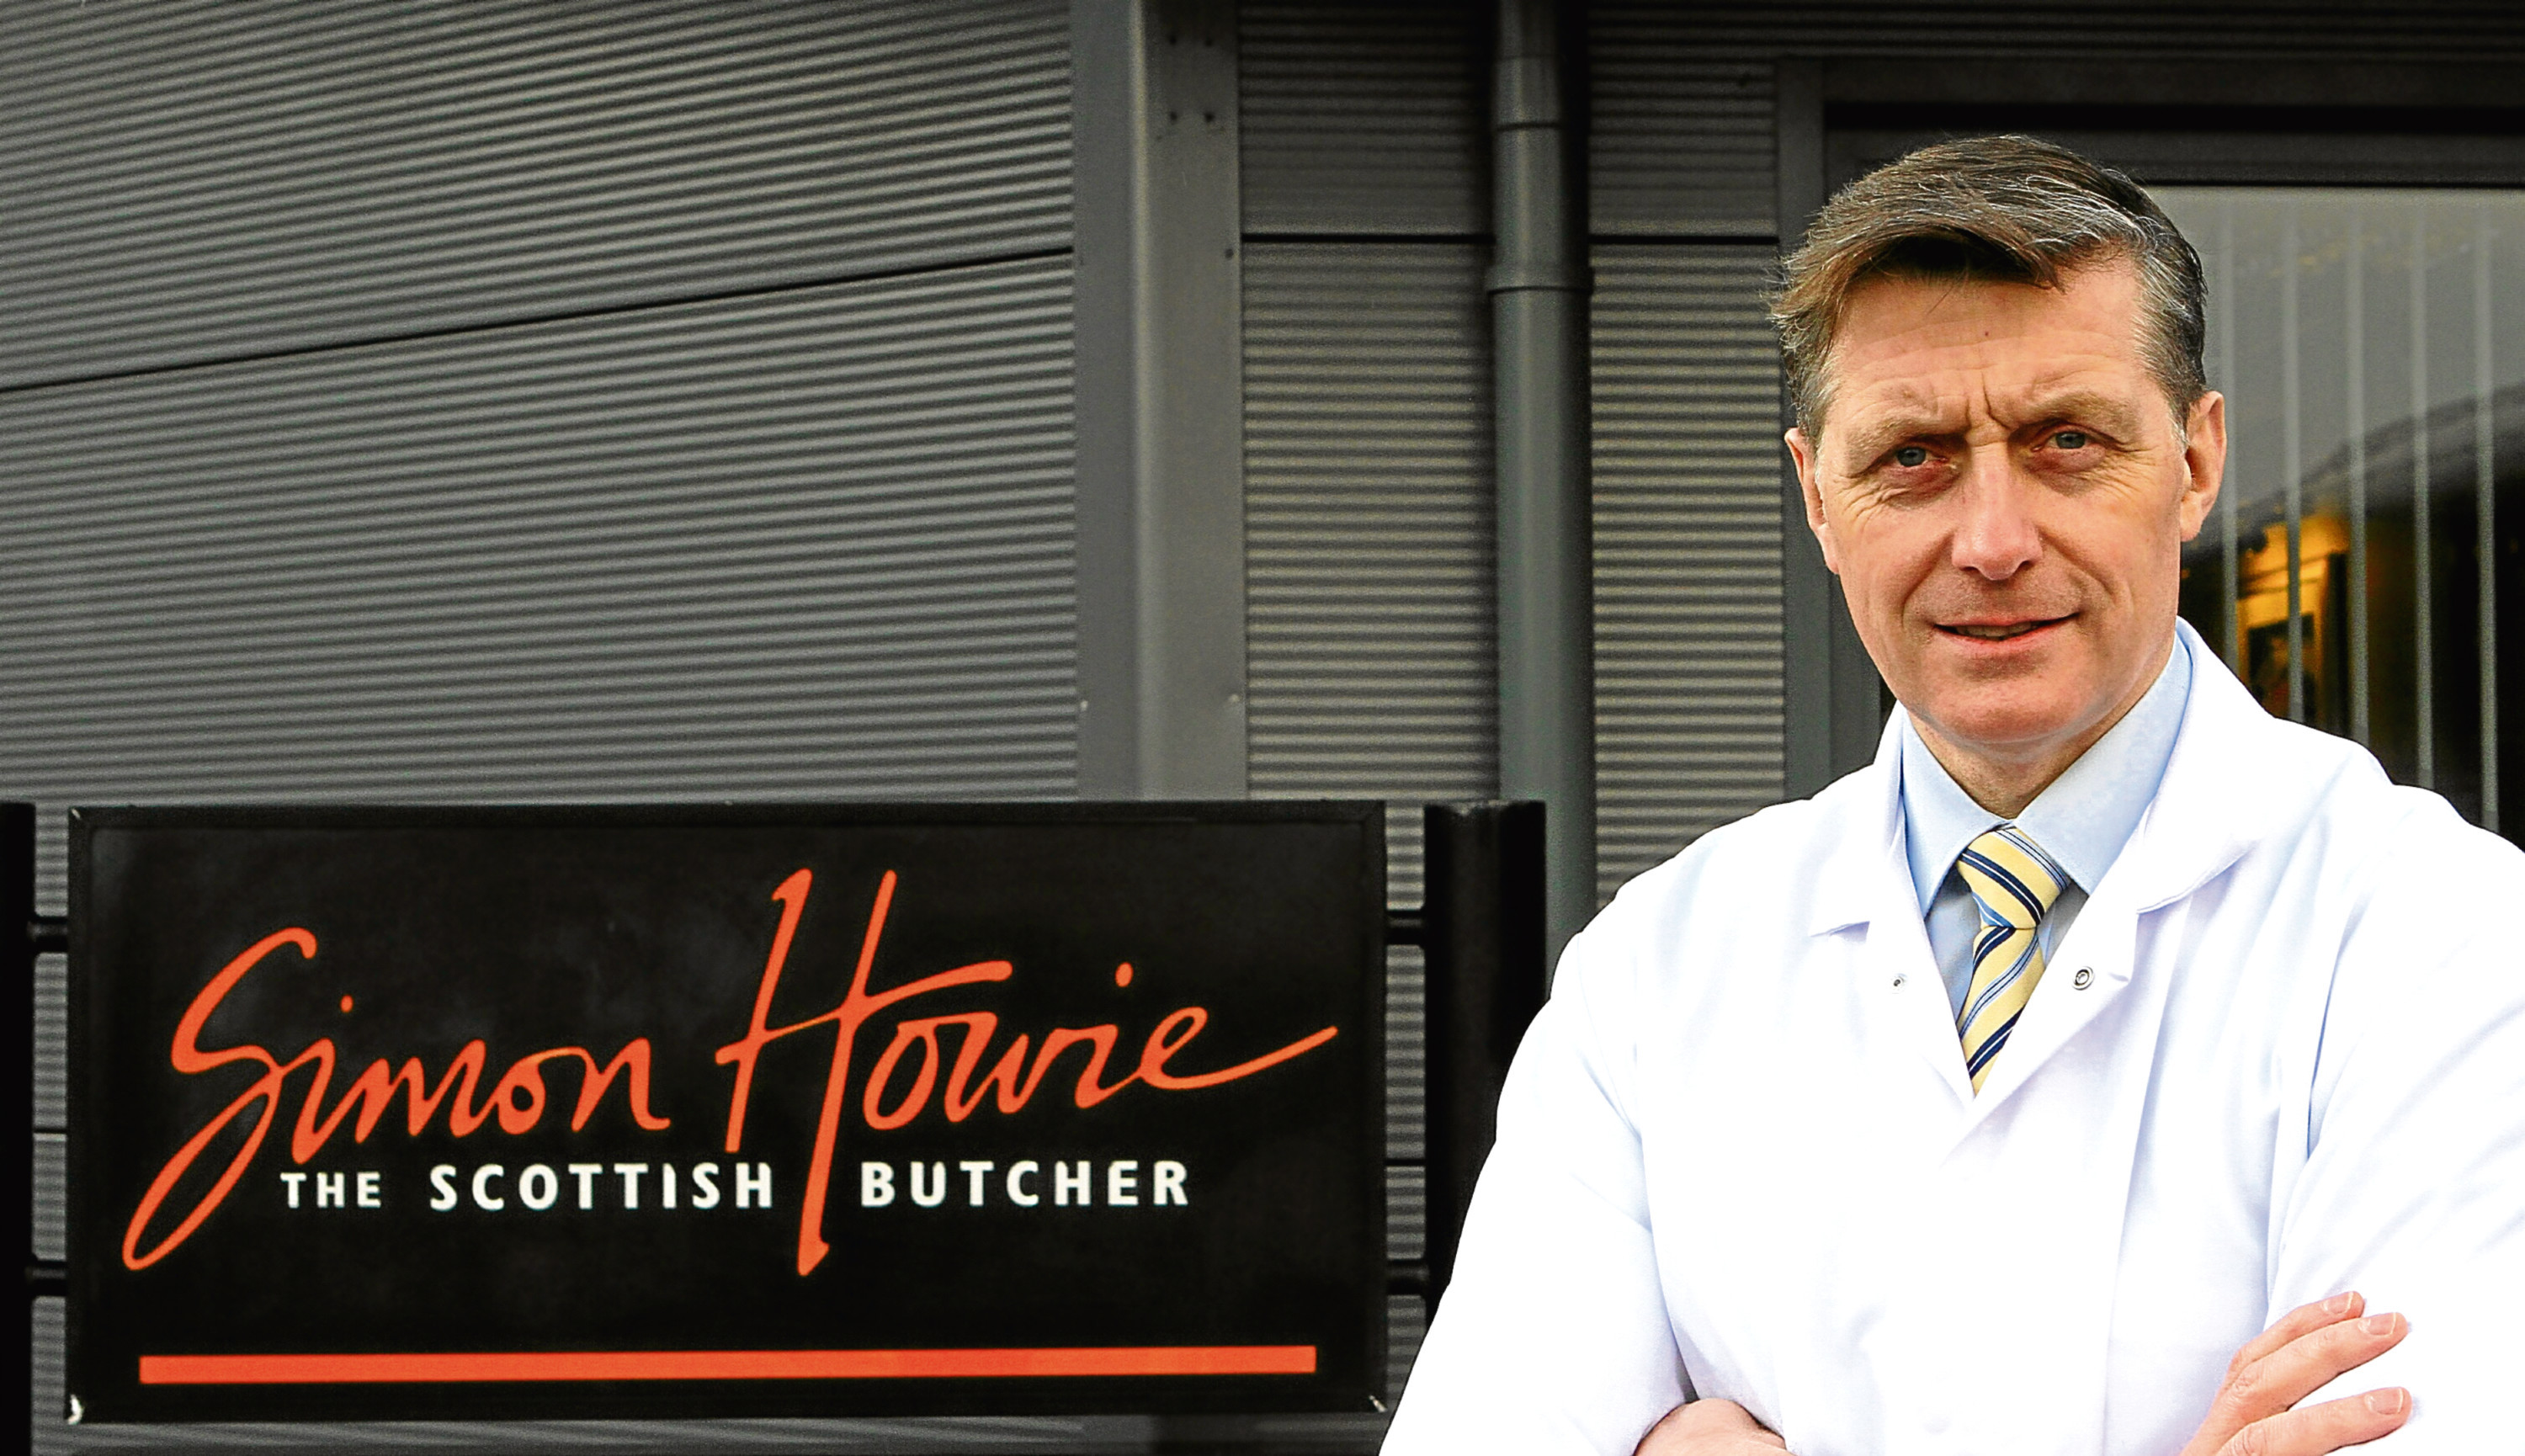 Courier Features - Caroline Lindsay story - Simon Howie and haggis - Dunning. 
THIS PICTURE IS FOR CAROLINE LINDSAY
MEET YOUR MAKER.
Picture shows; Simon Howie, butcher, at his company's headquarters in Dunning today. Monday 9th January 2017.